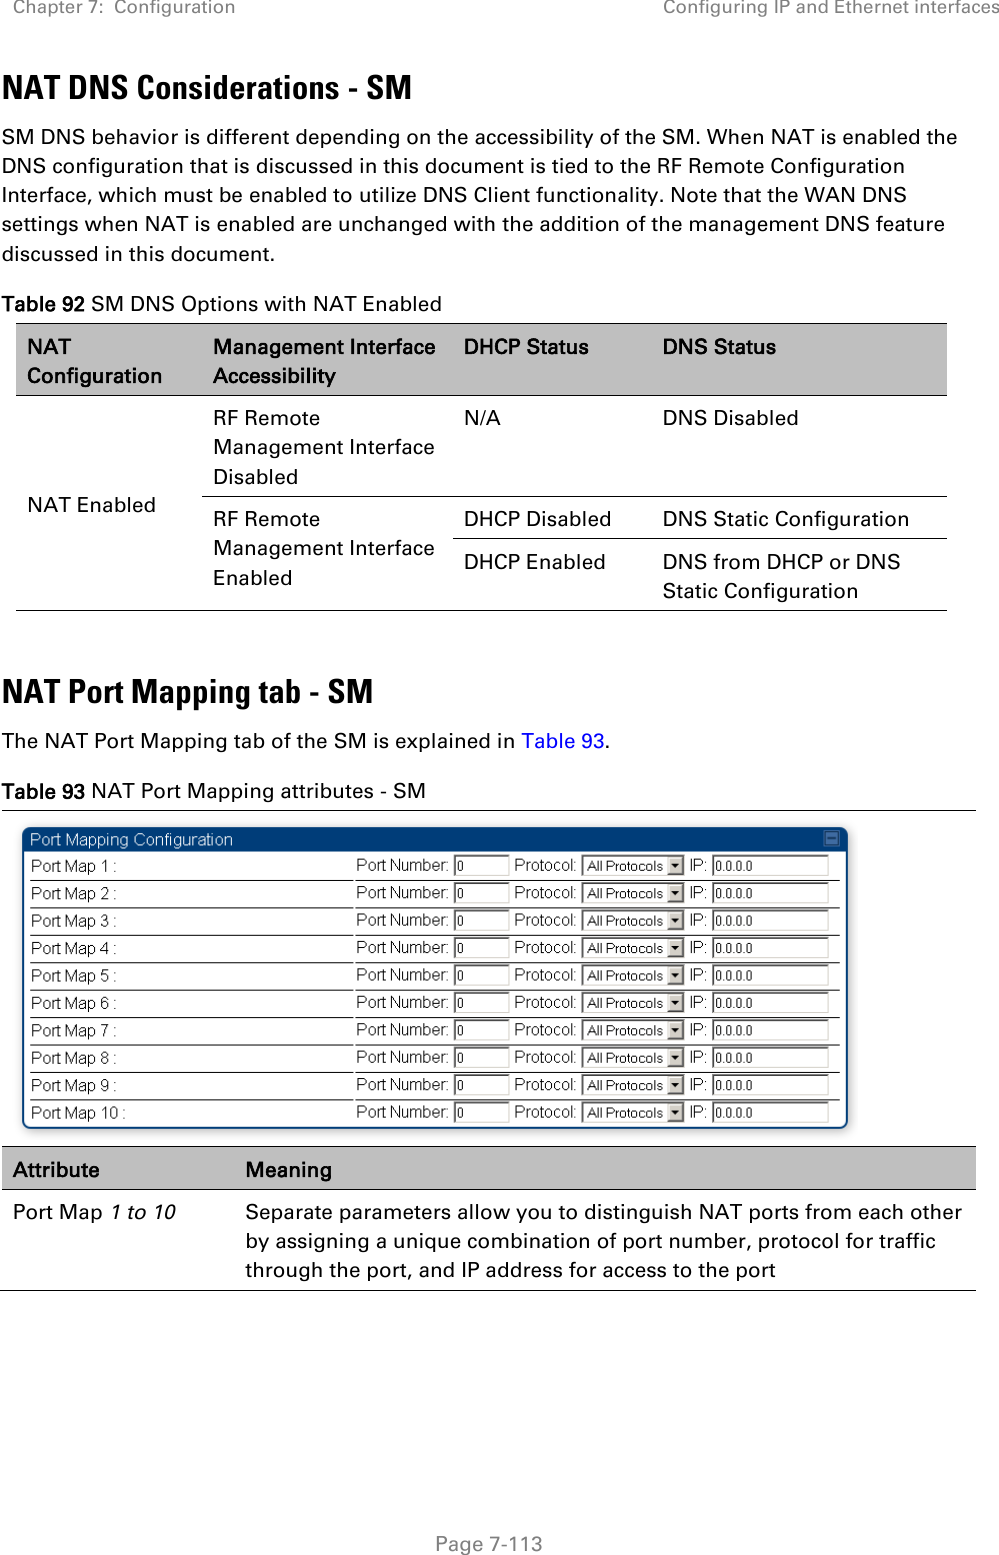 Chapter 7:  Configuration Configuring IP and Ethernet interfaces   Page 7-113 NAT DNS Considerations - SM SM DNS behavior is different depending on the accessibility of the SM. When NAT is enabled the DNS configuration that is discussed in this document is tied to the RF Remote Configuration Interface, which must be enabled to utilize DNS Client functionality. Note that the WAN DNS settings when NAT is enabled are unchanged with the addition of the management DNS feature discussed in this document.  Table 92 SM DNS Options with NAT Enabled NAT Configuration Management Interface Accessibility DHCP Status DNS Status NAT Enabled RF Remote Management Interface Disabled N/A DNS Disabled RF Remote Management Interface Enabled DHCP Disabled DNS Static Configuration DHCP Enabled DNS from DHCP or DNS Static Configuration  NAT Port Mapping tab - SM The NAT Port Mapping tab of the SM is explained in Table 93. Table 93 NAT Port Mapping attributes - SM  Attribute Meaning Port Map 1 to 10 Separate parameters allow you to distinguish NAT ports from each other by assigning a unique combination of port number, protocol for traffic through the port, and IP address for access to the port   